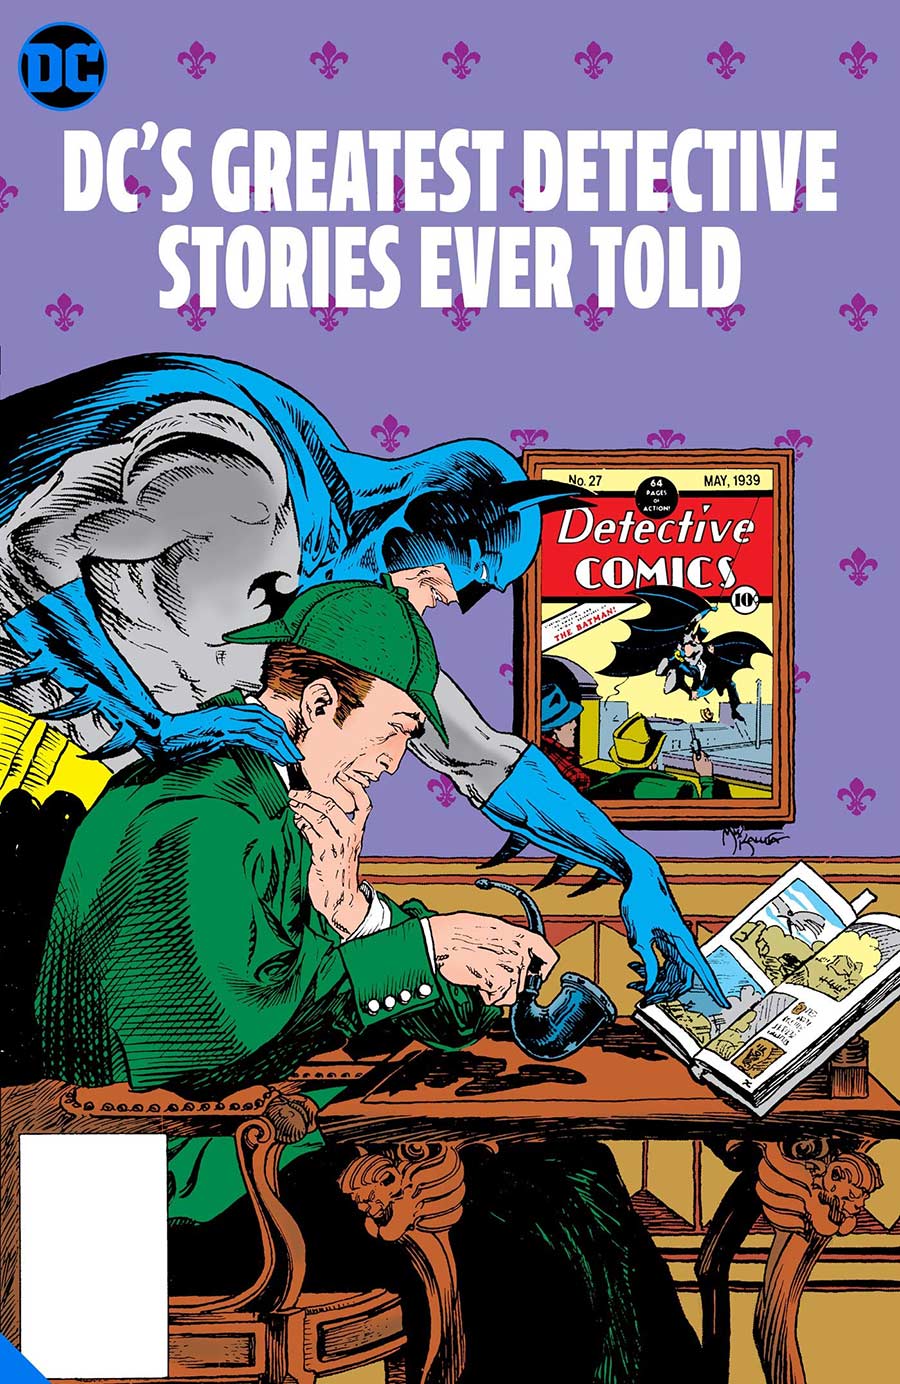 DC’s Greatest Detective Stories Ever Told